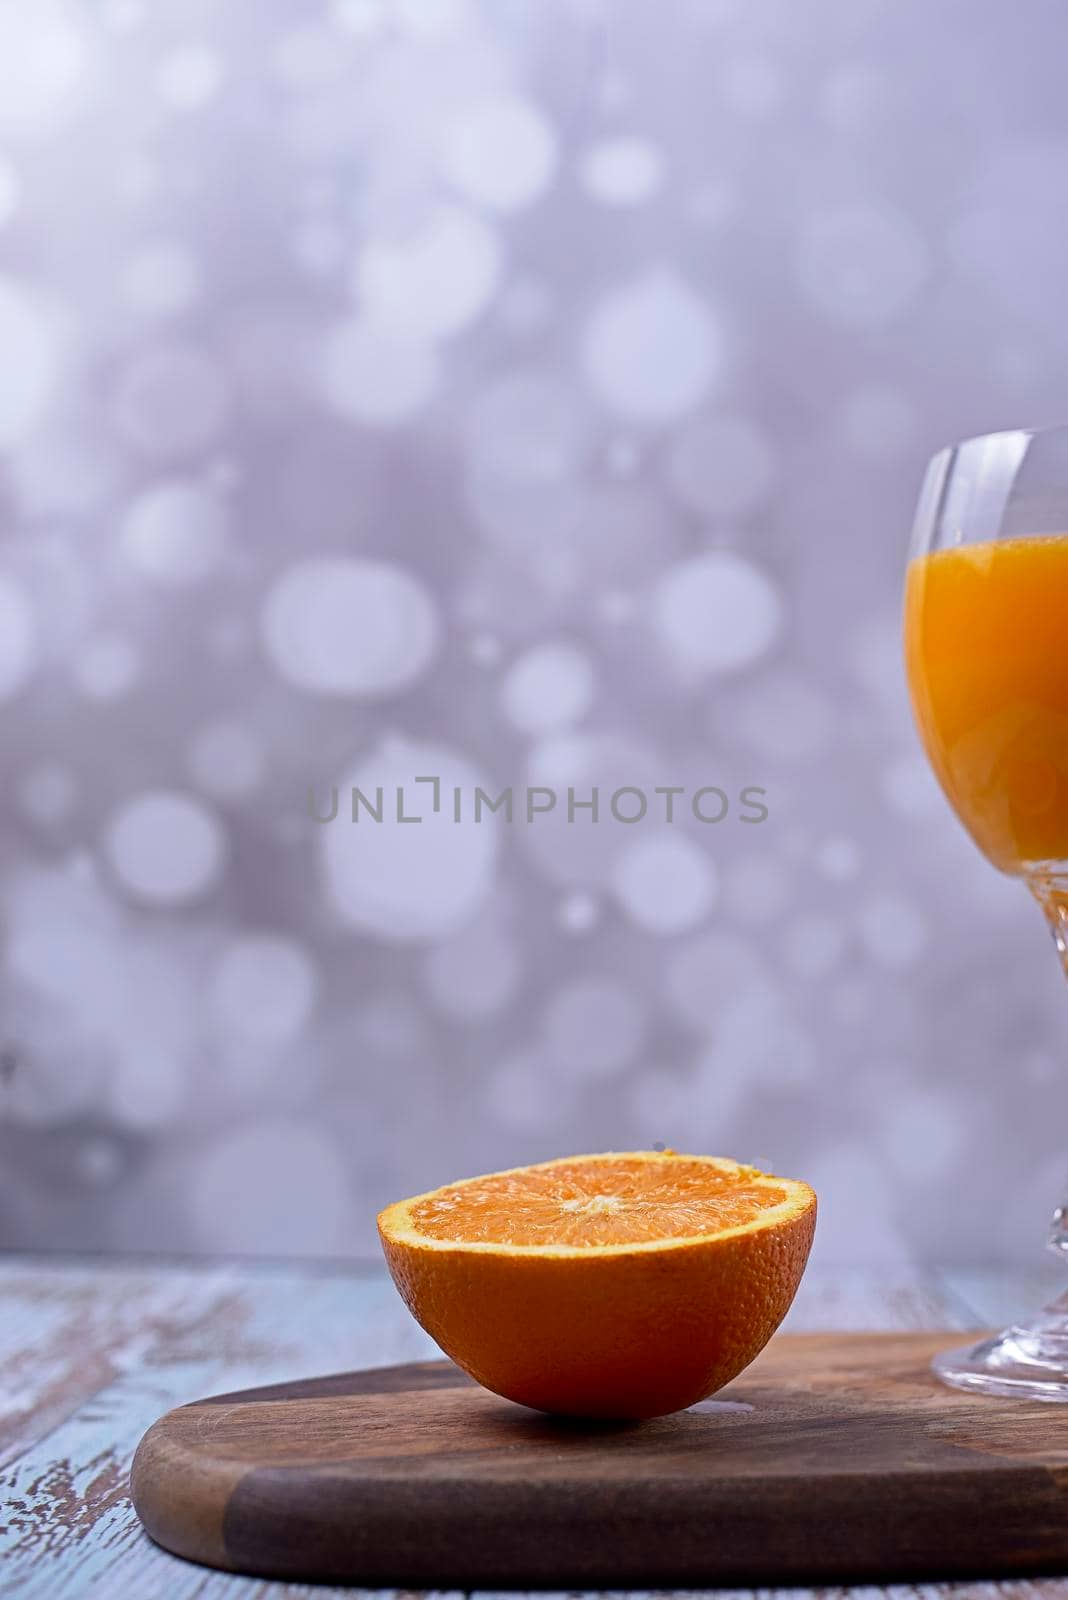 Glass of orange juice cut on wooden table bright background, front view, half orange